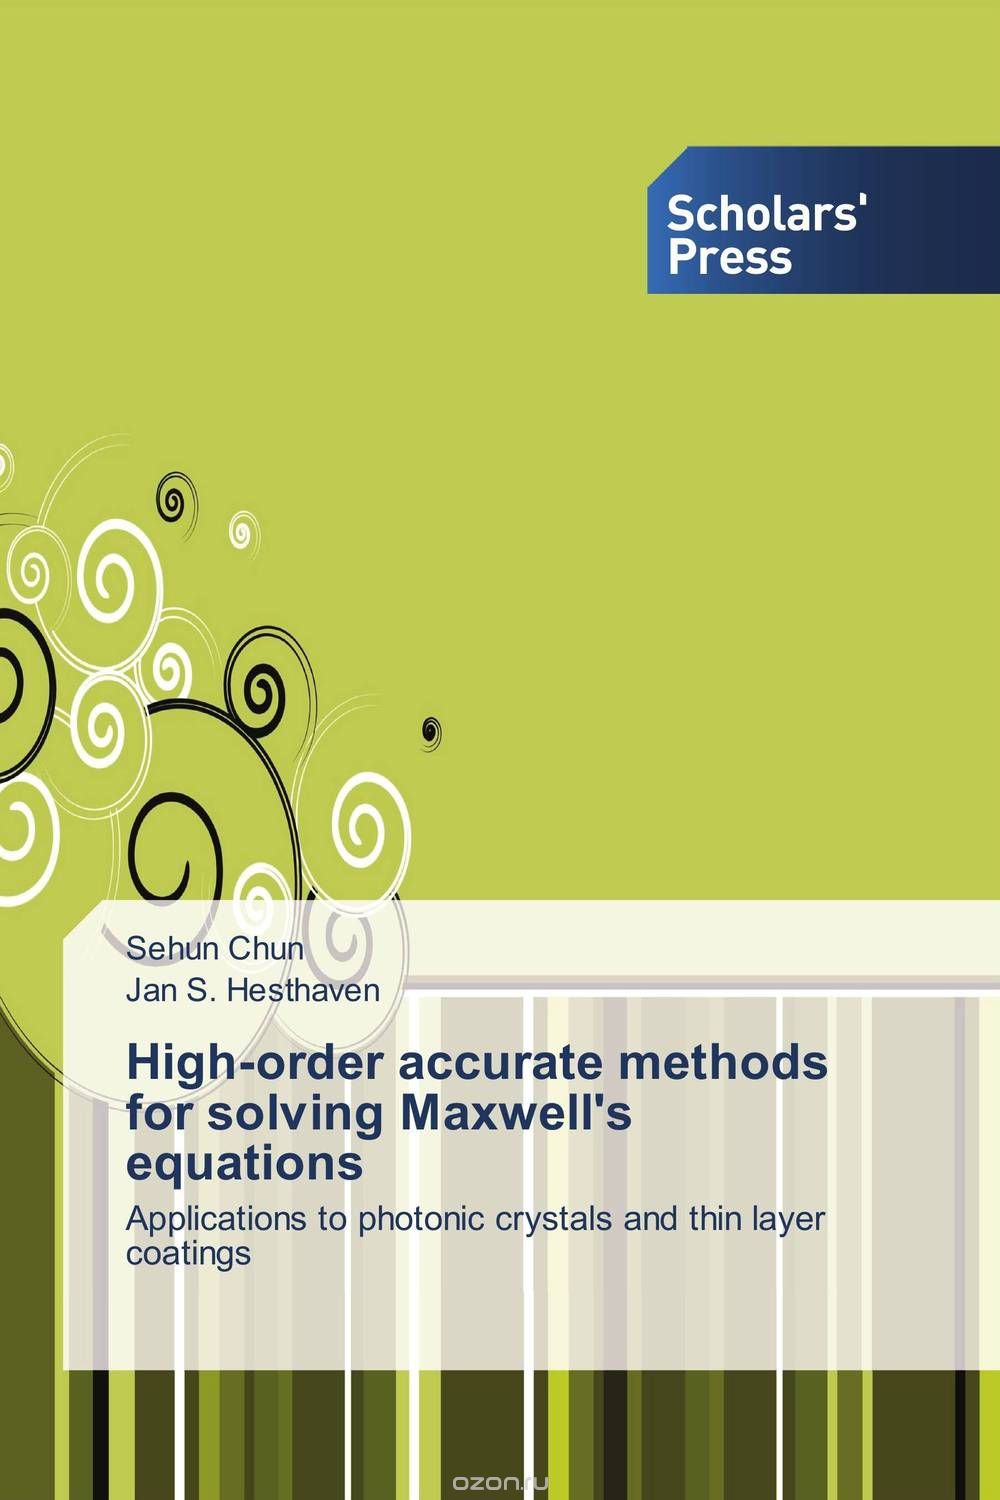 Скачать книгу "High-order accurate methods for solving Maxwell's equations"